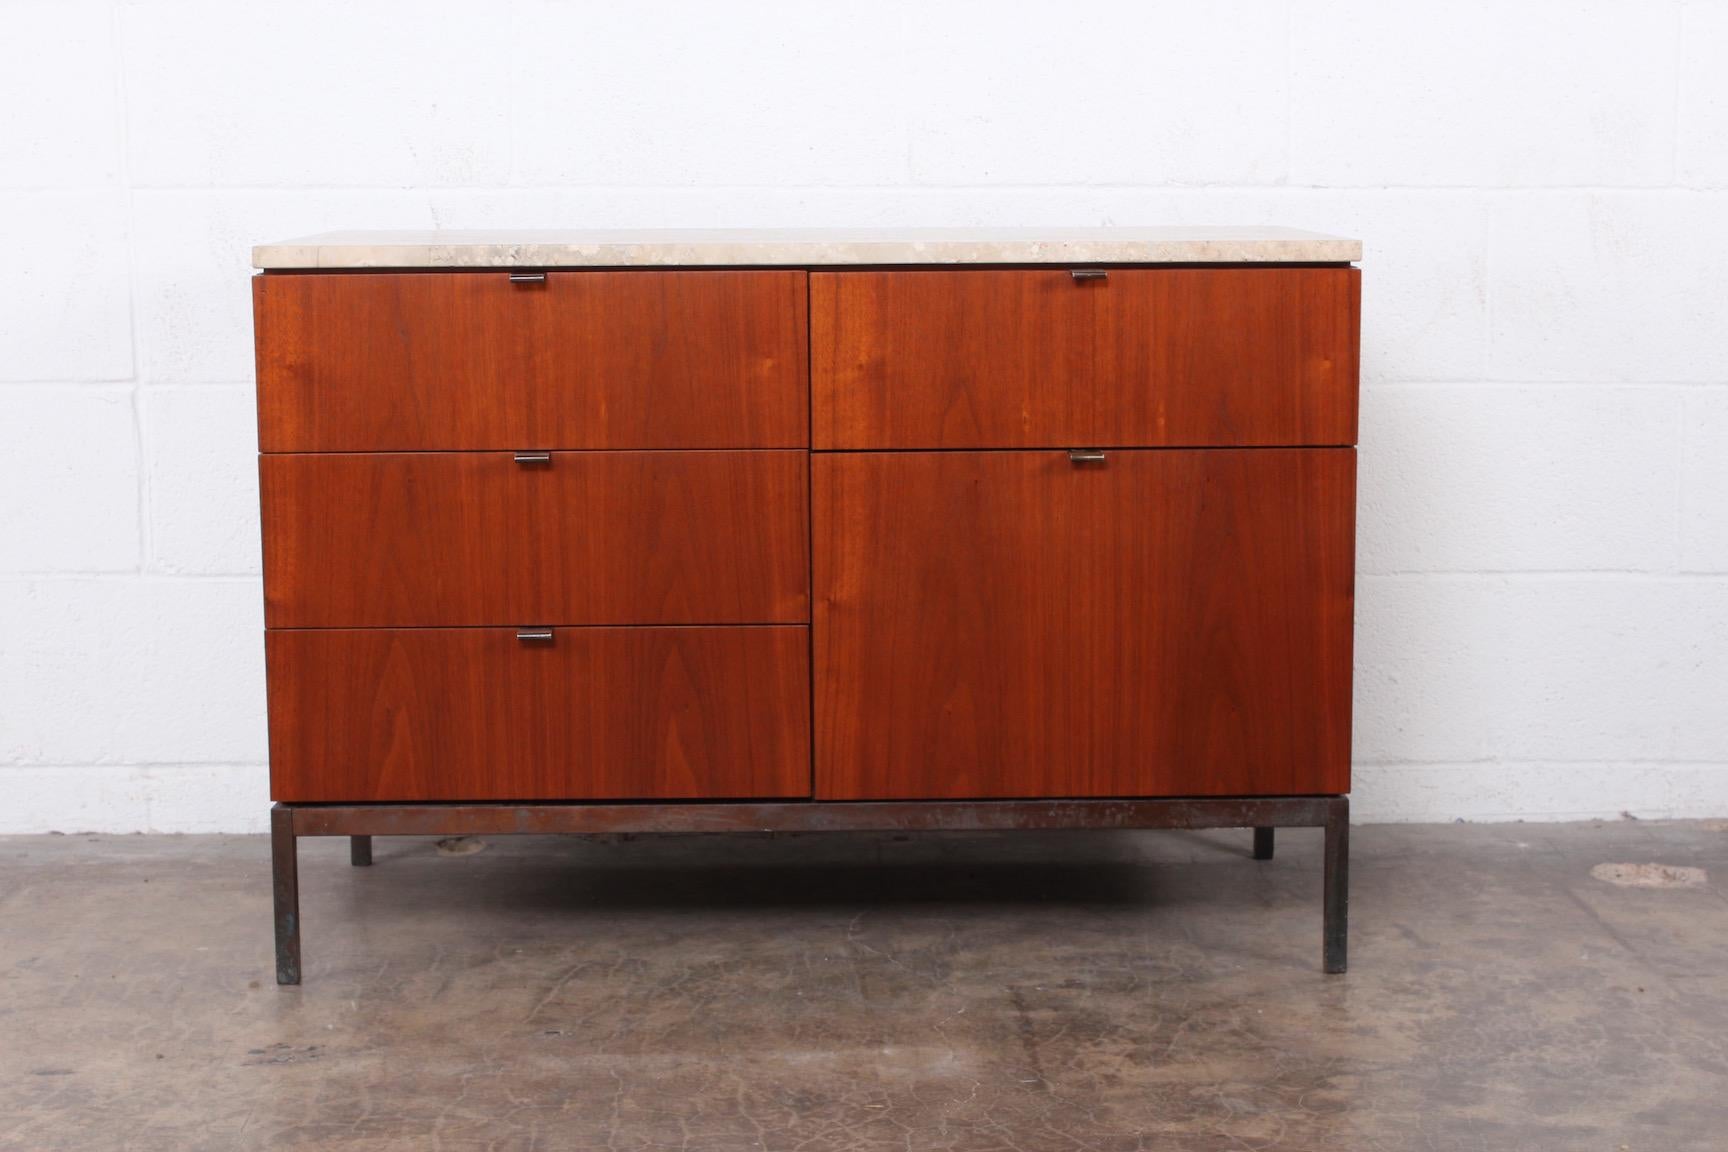 A walnut credenza with bronze base/hardware and travertine top. Designed by Florence Knoll for Knoll.